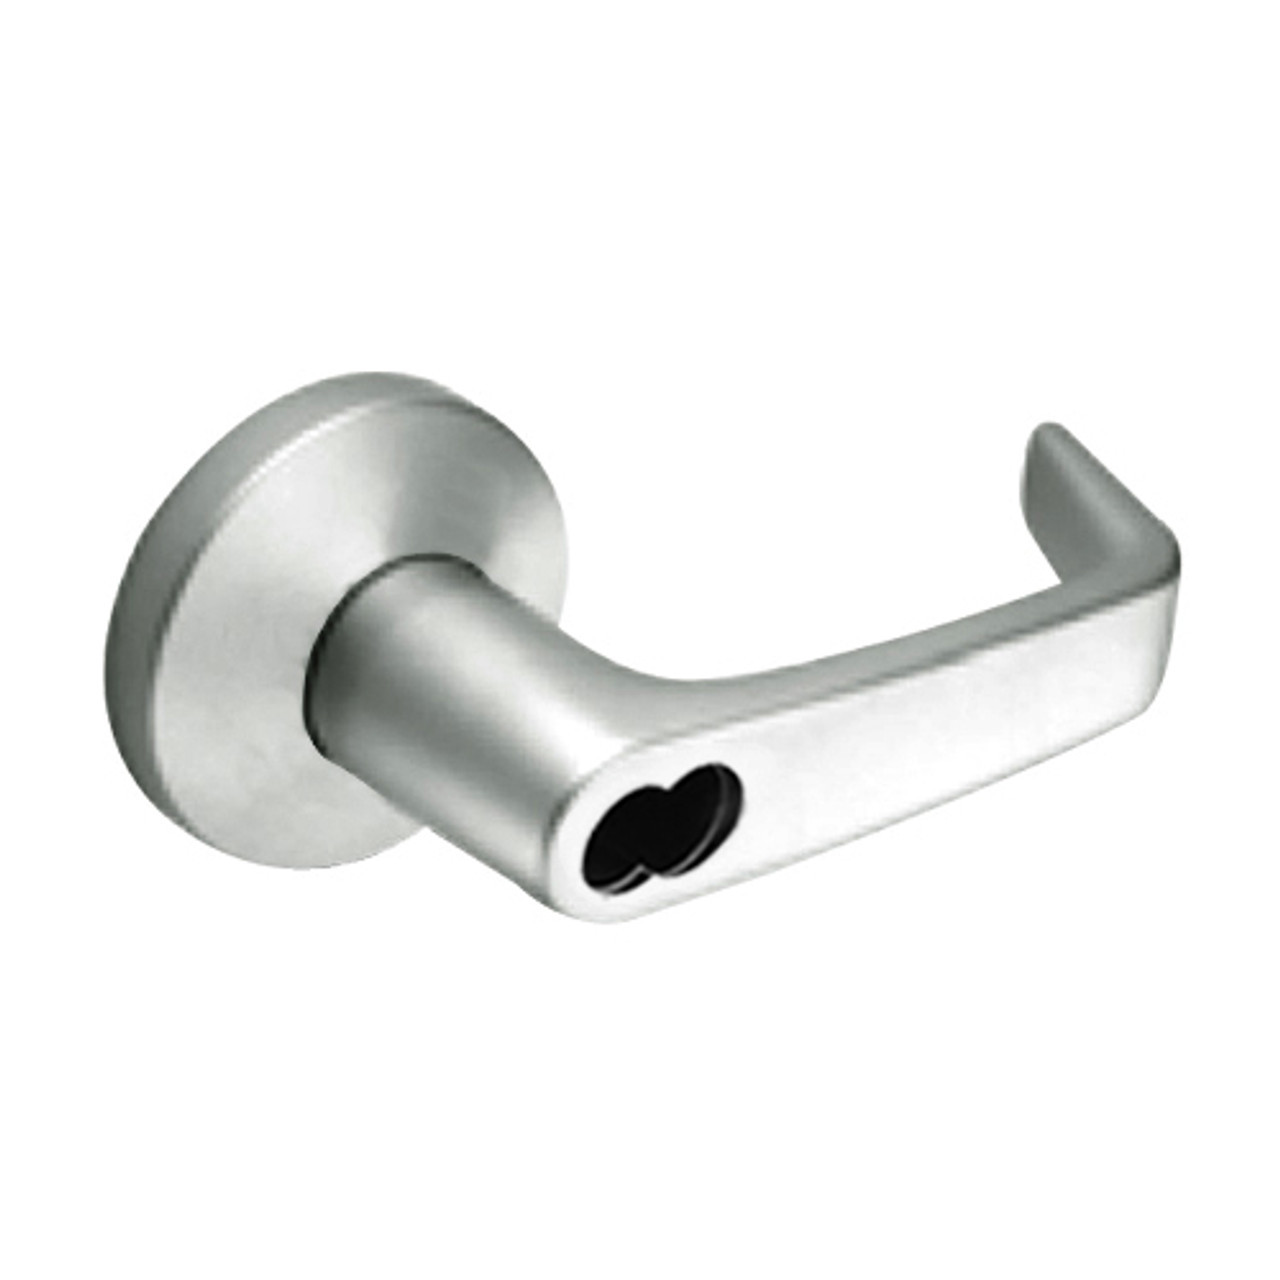 9K47E15KSTK619LM Best 9K Series Service Station Cylindrical Lever Locks with Contour Angle with Return Lever Design Accept 7 Pin Best Core in Satin Nickel